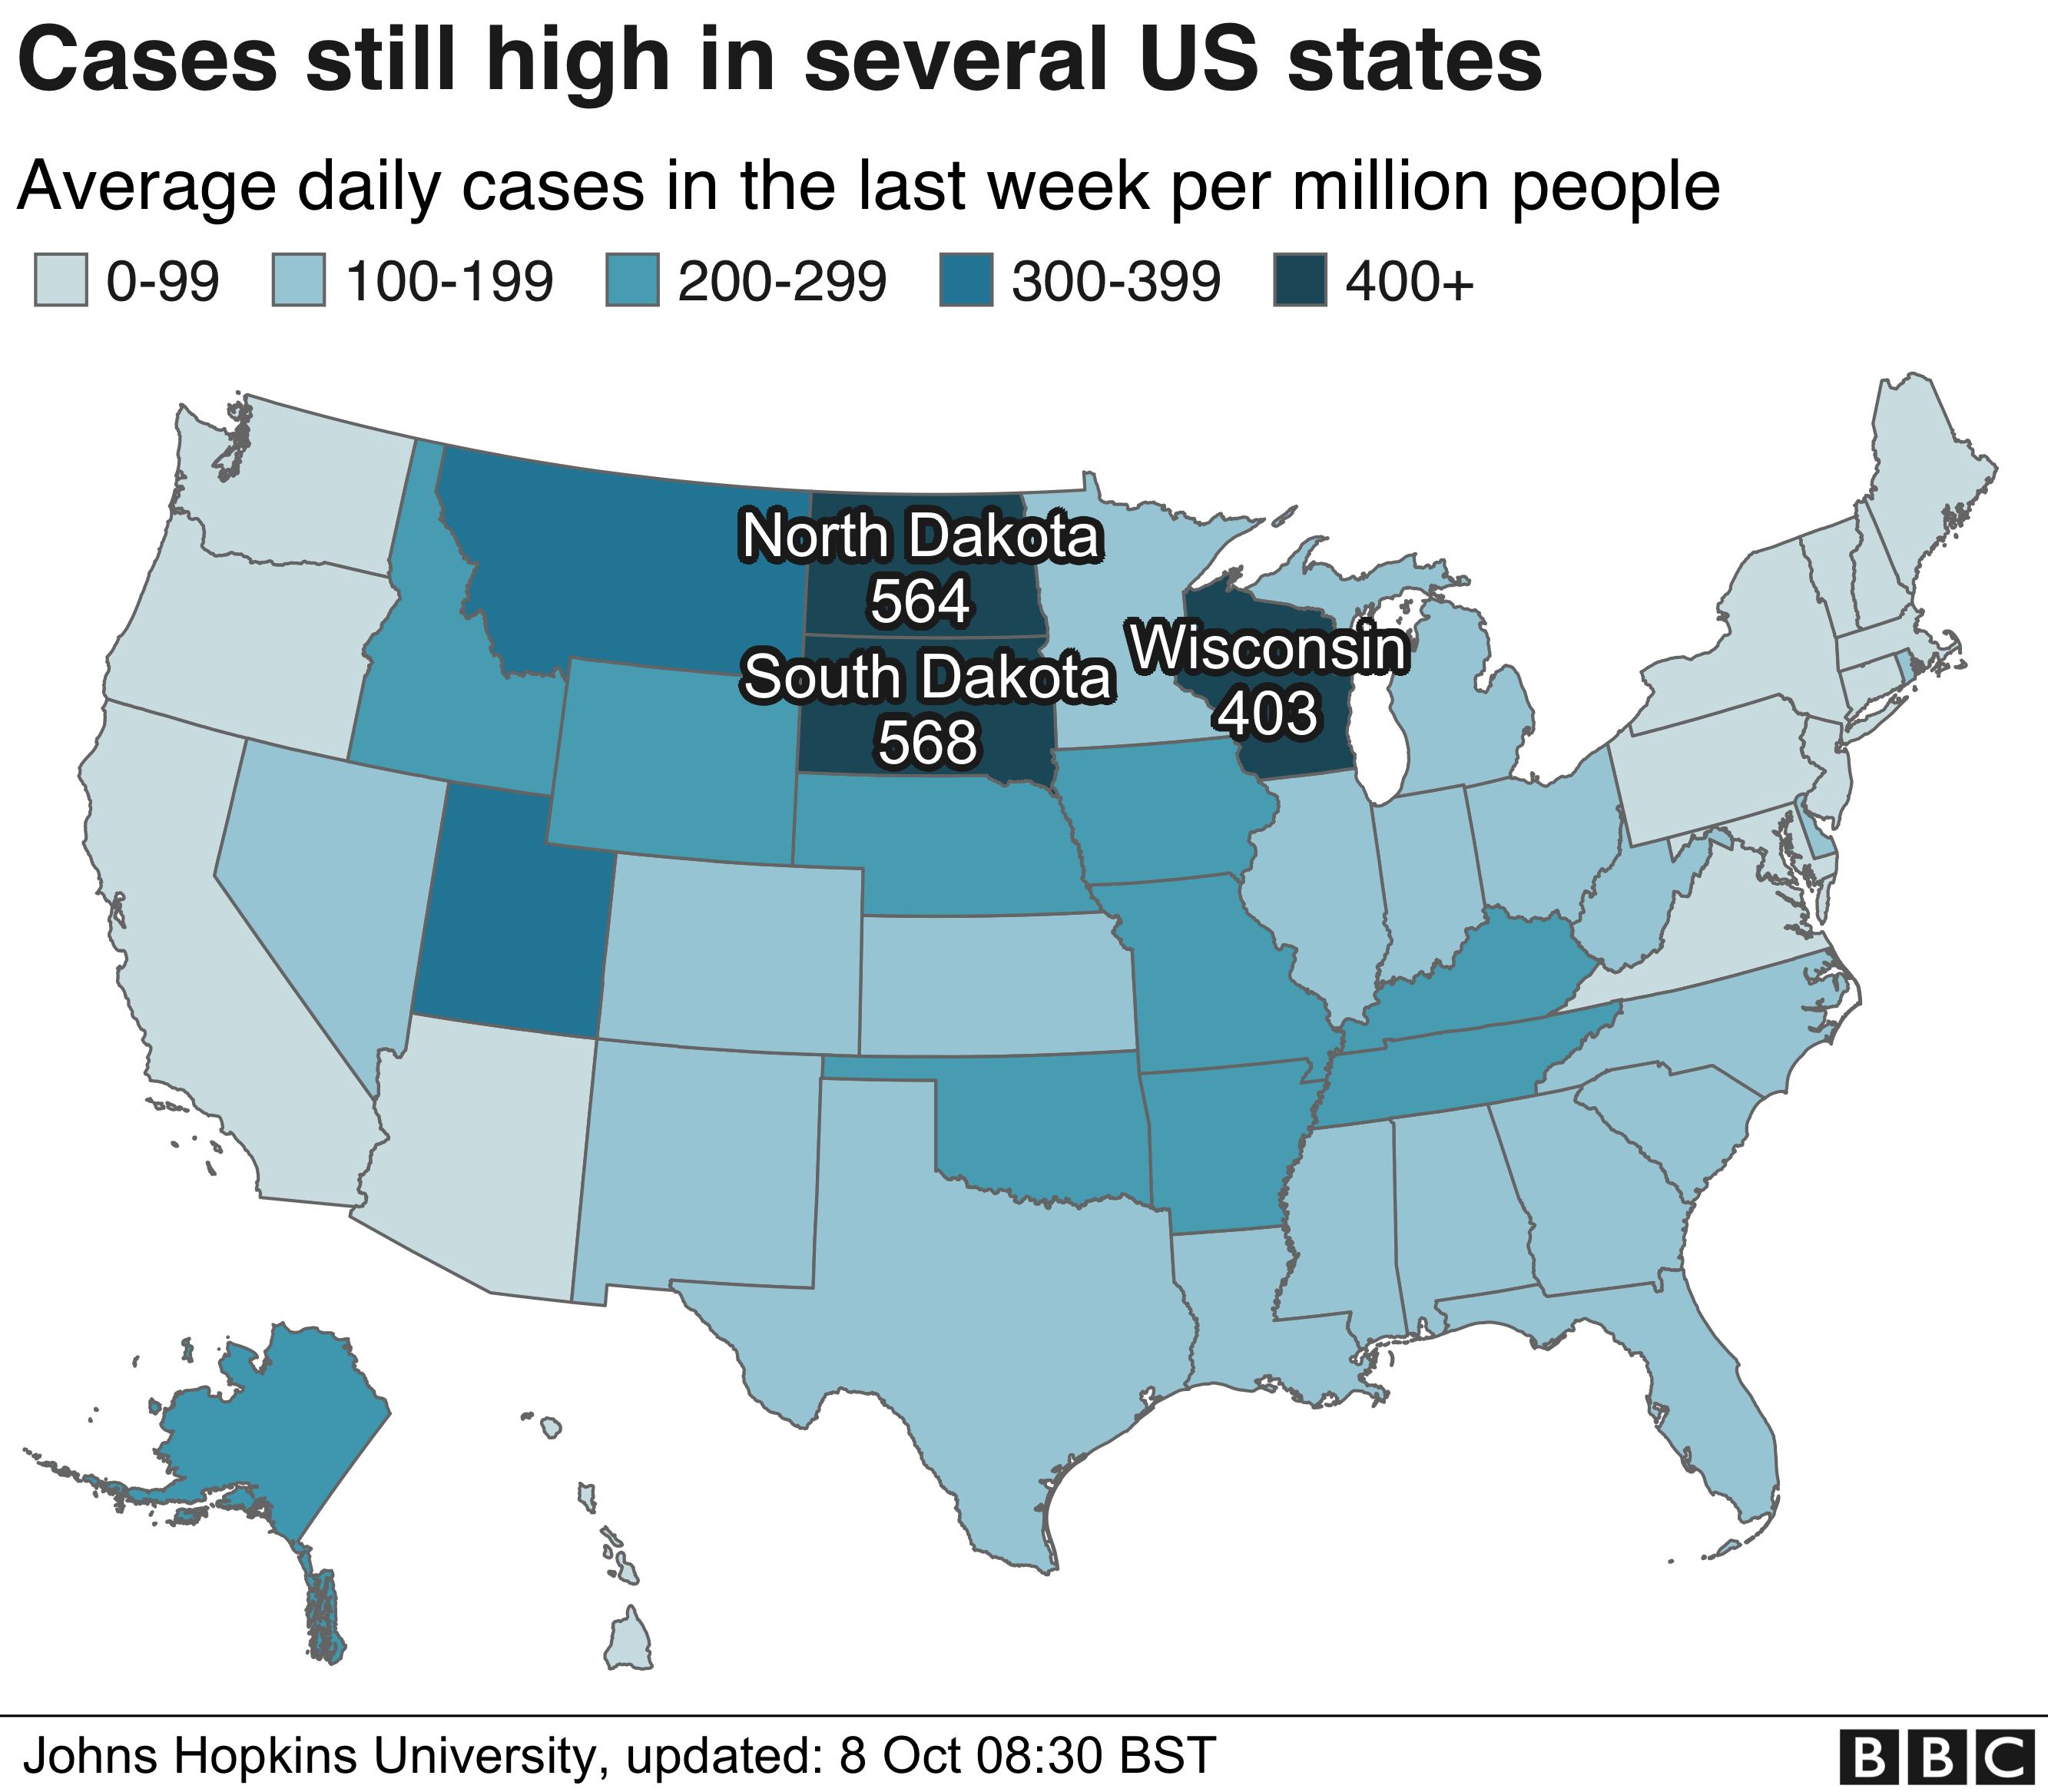 Map showing the average number of daily cases in the last week per million people by state. South Dakota, North Dakota and Wisconsin have the highest numbers at the moment.